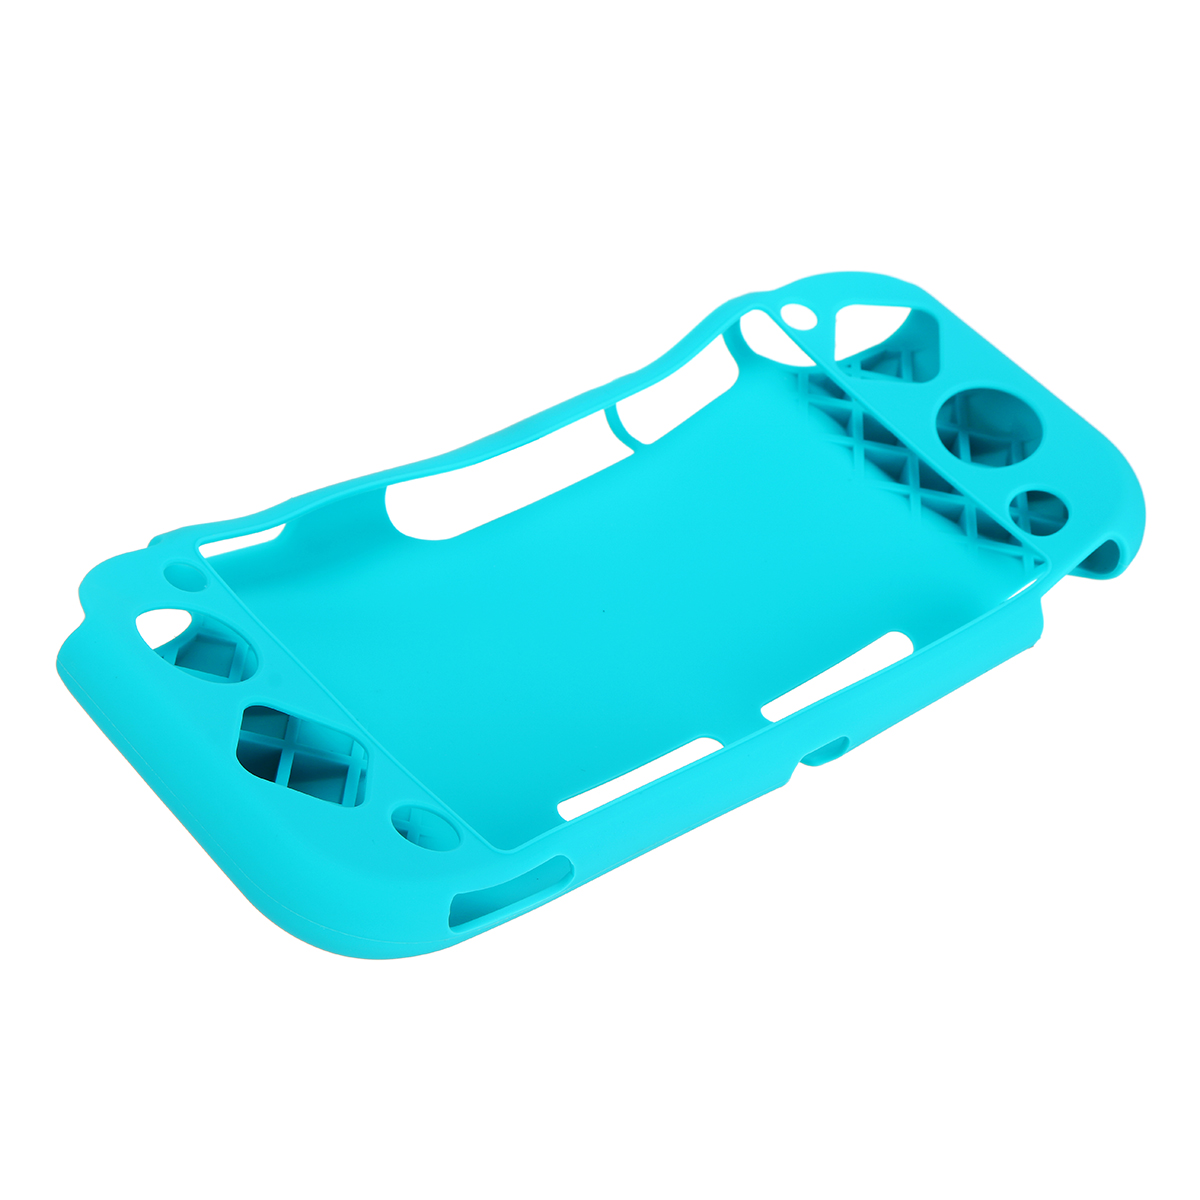 Protective Soft Silicone Case Cover Shell for Nintendo Switch Lite Game Console 23